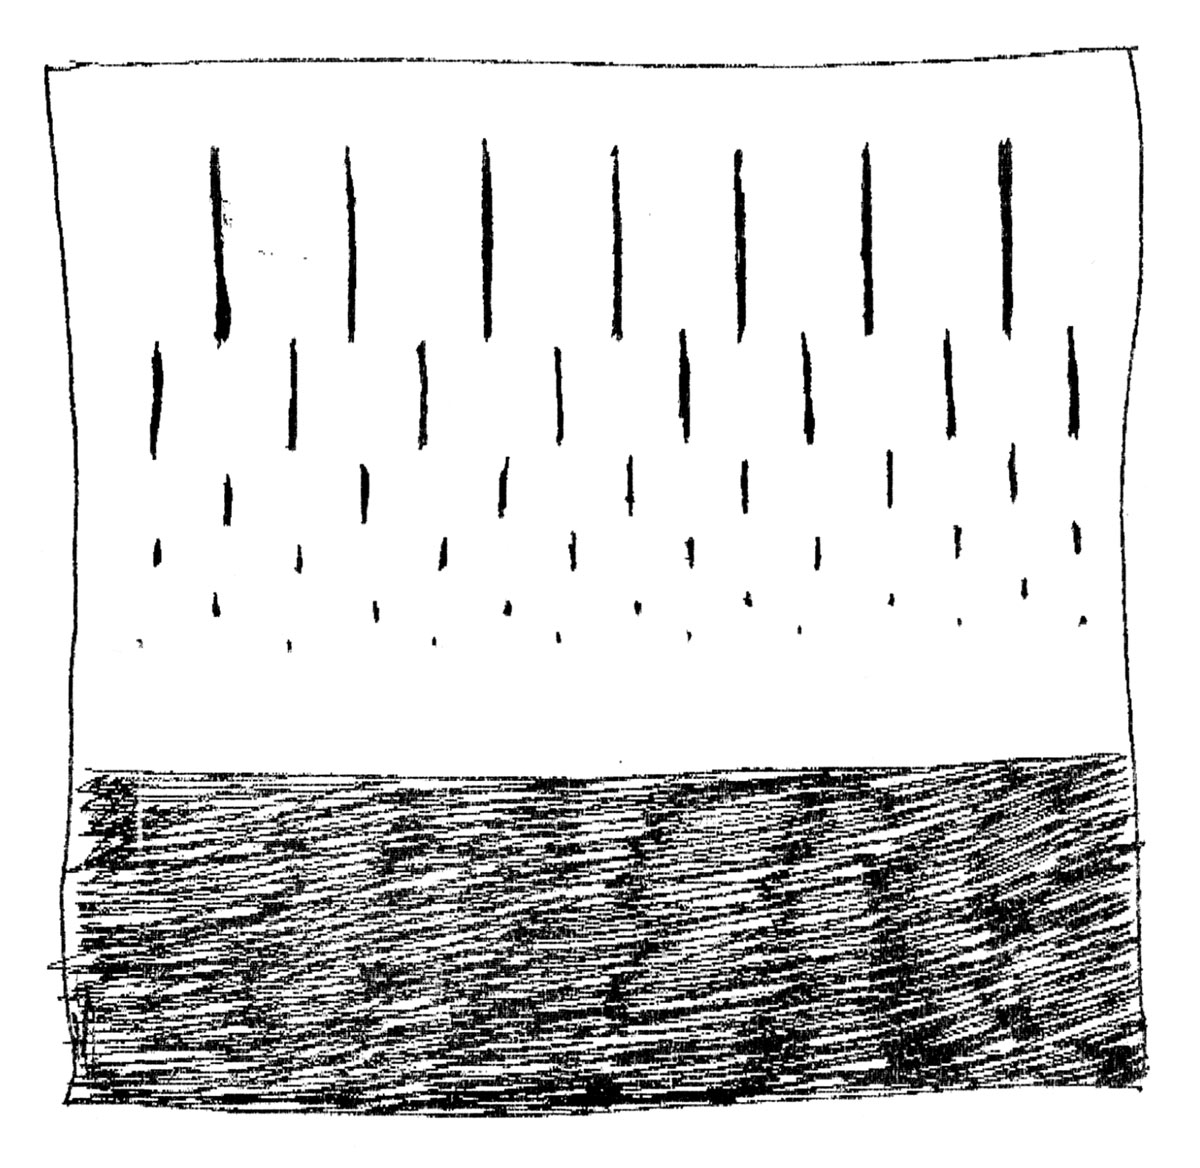 Artist Jenny Perlin’s’s 2001 two thousand and one drawing of Lightning Field.